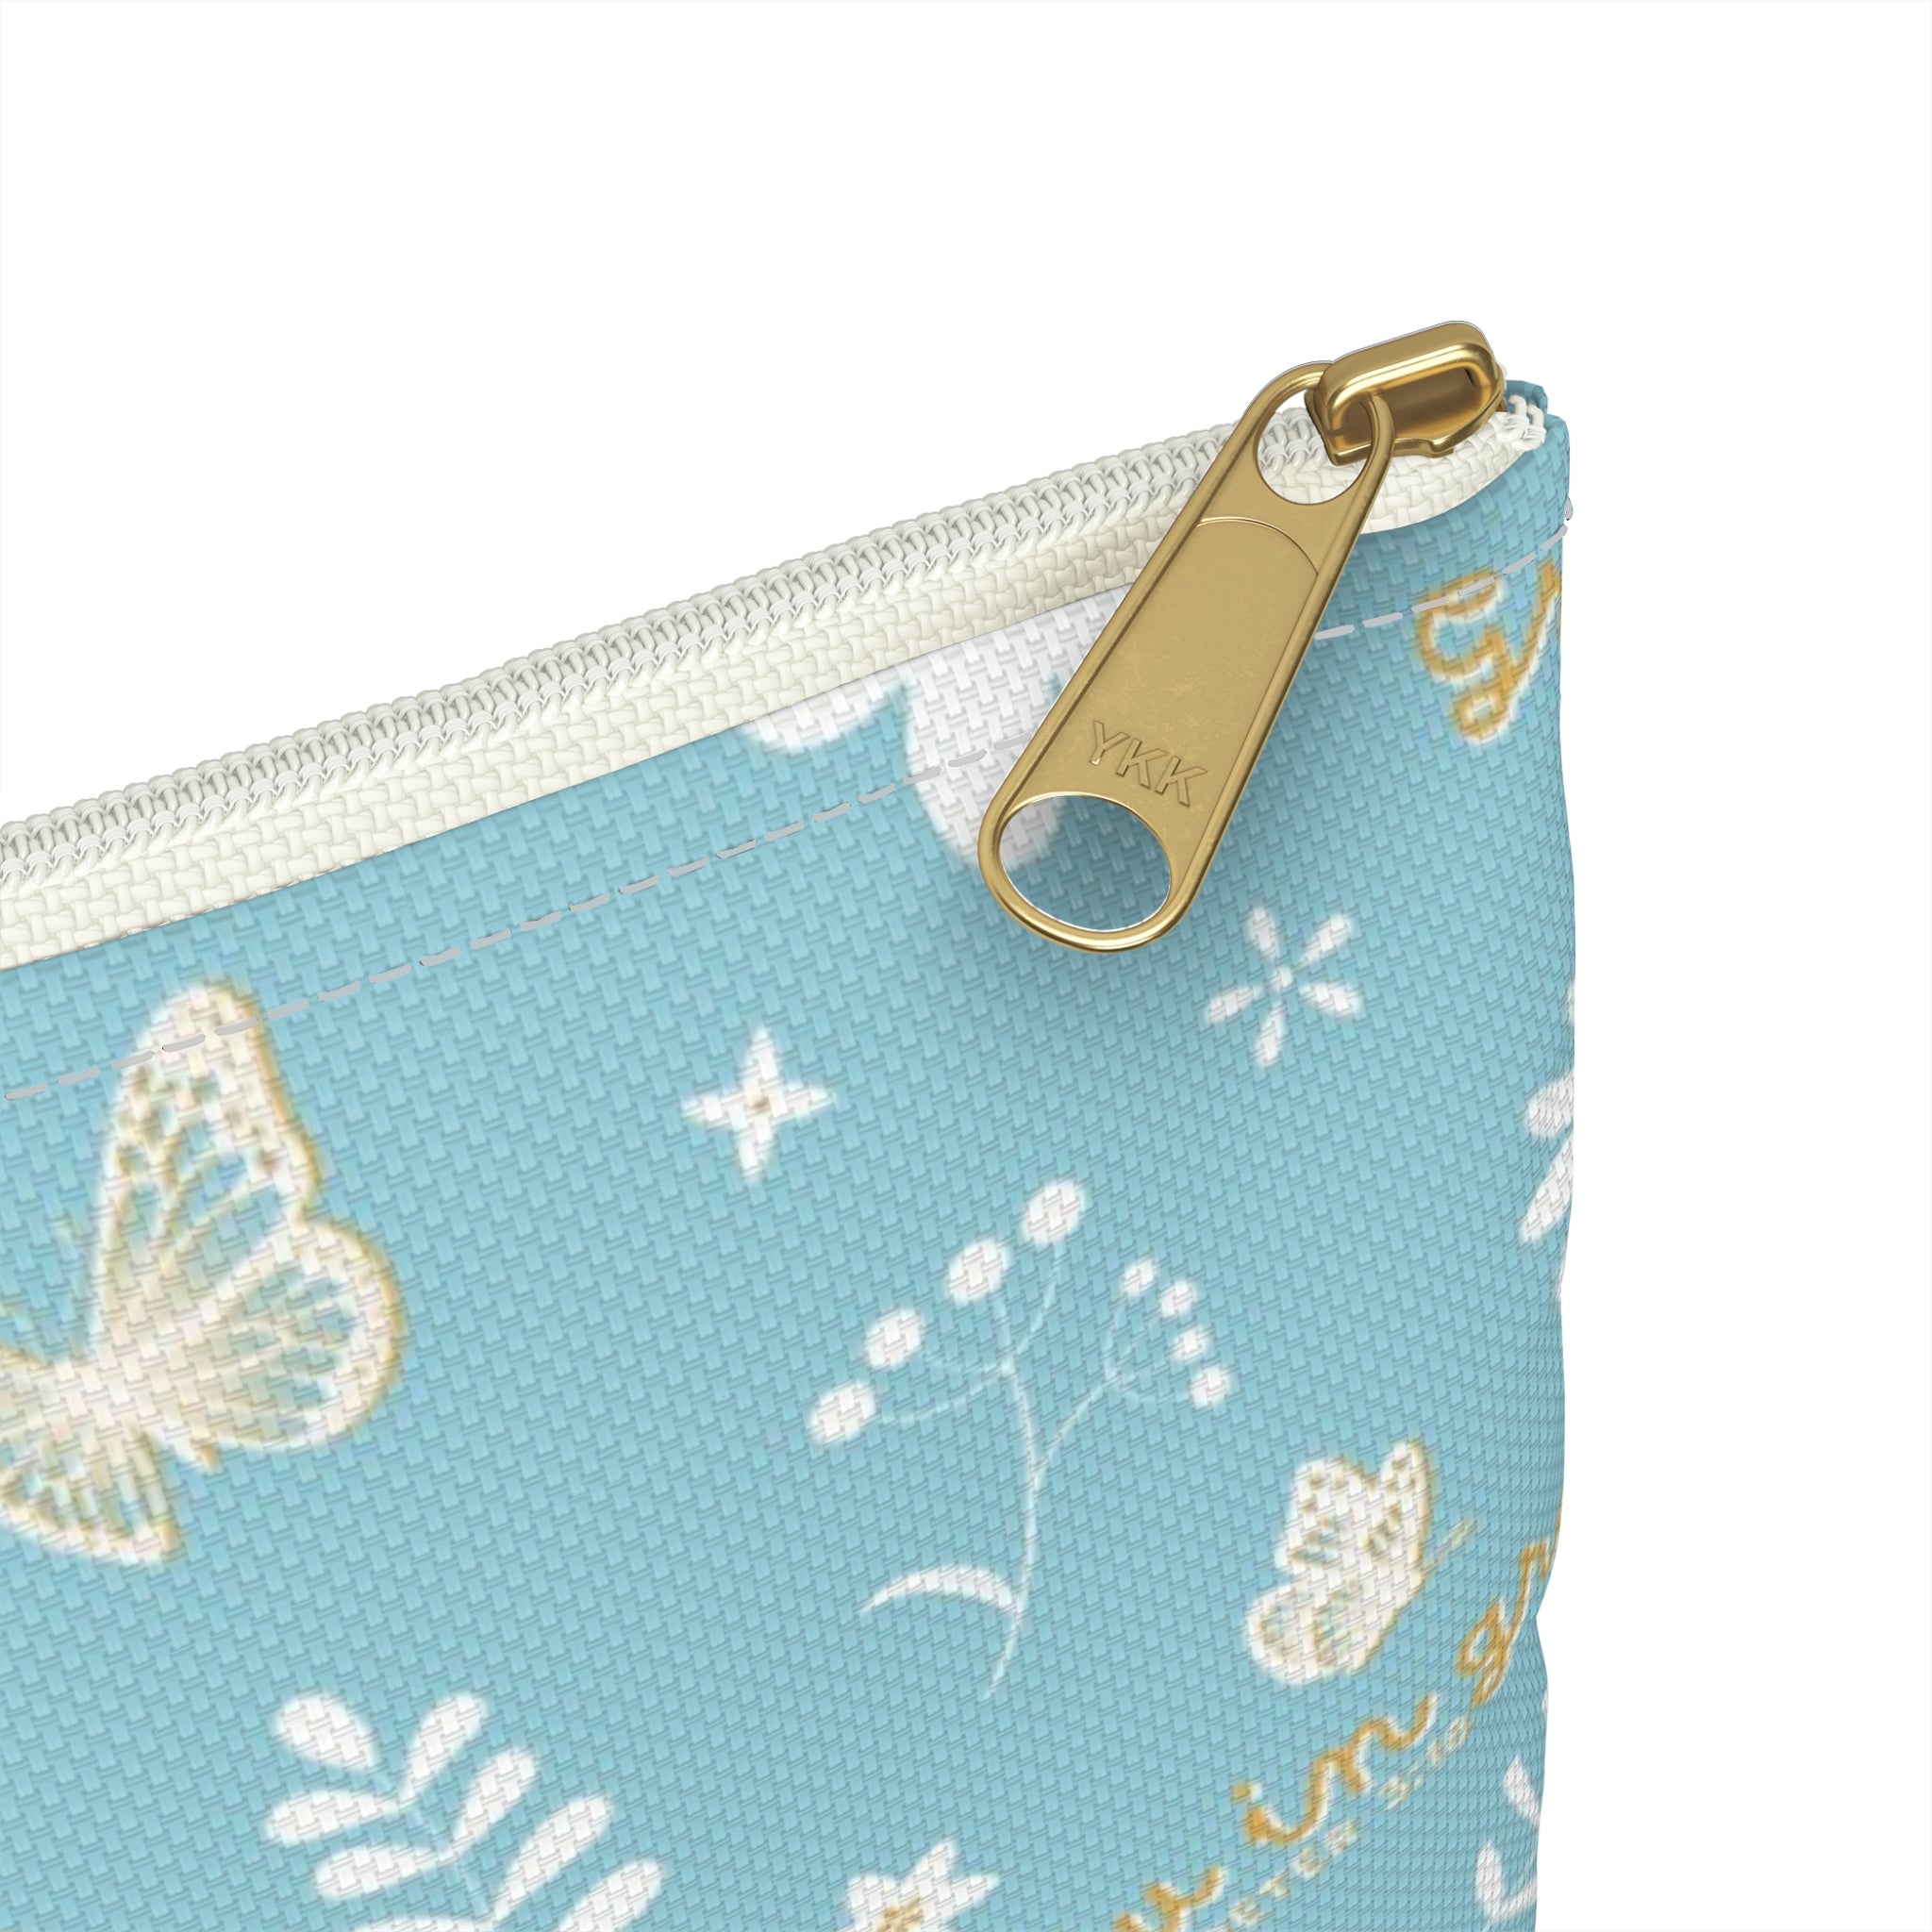 Grow in Grace Pencil Pouch